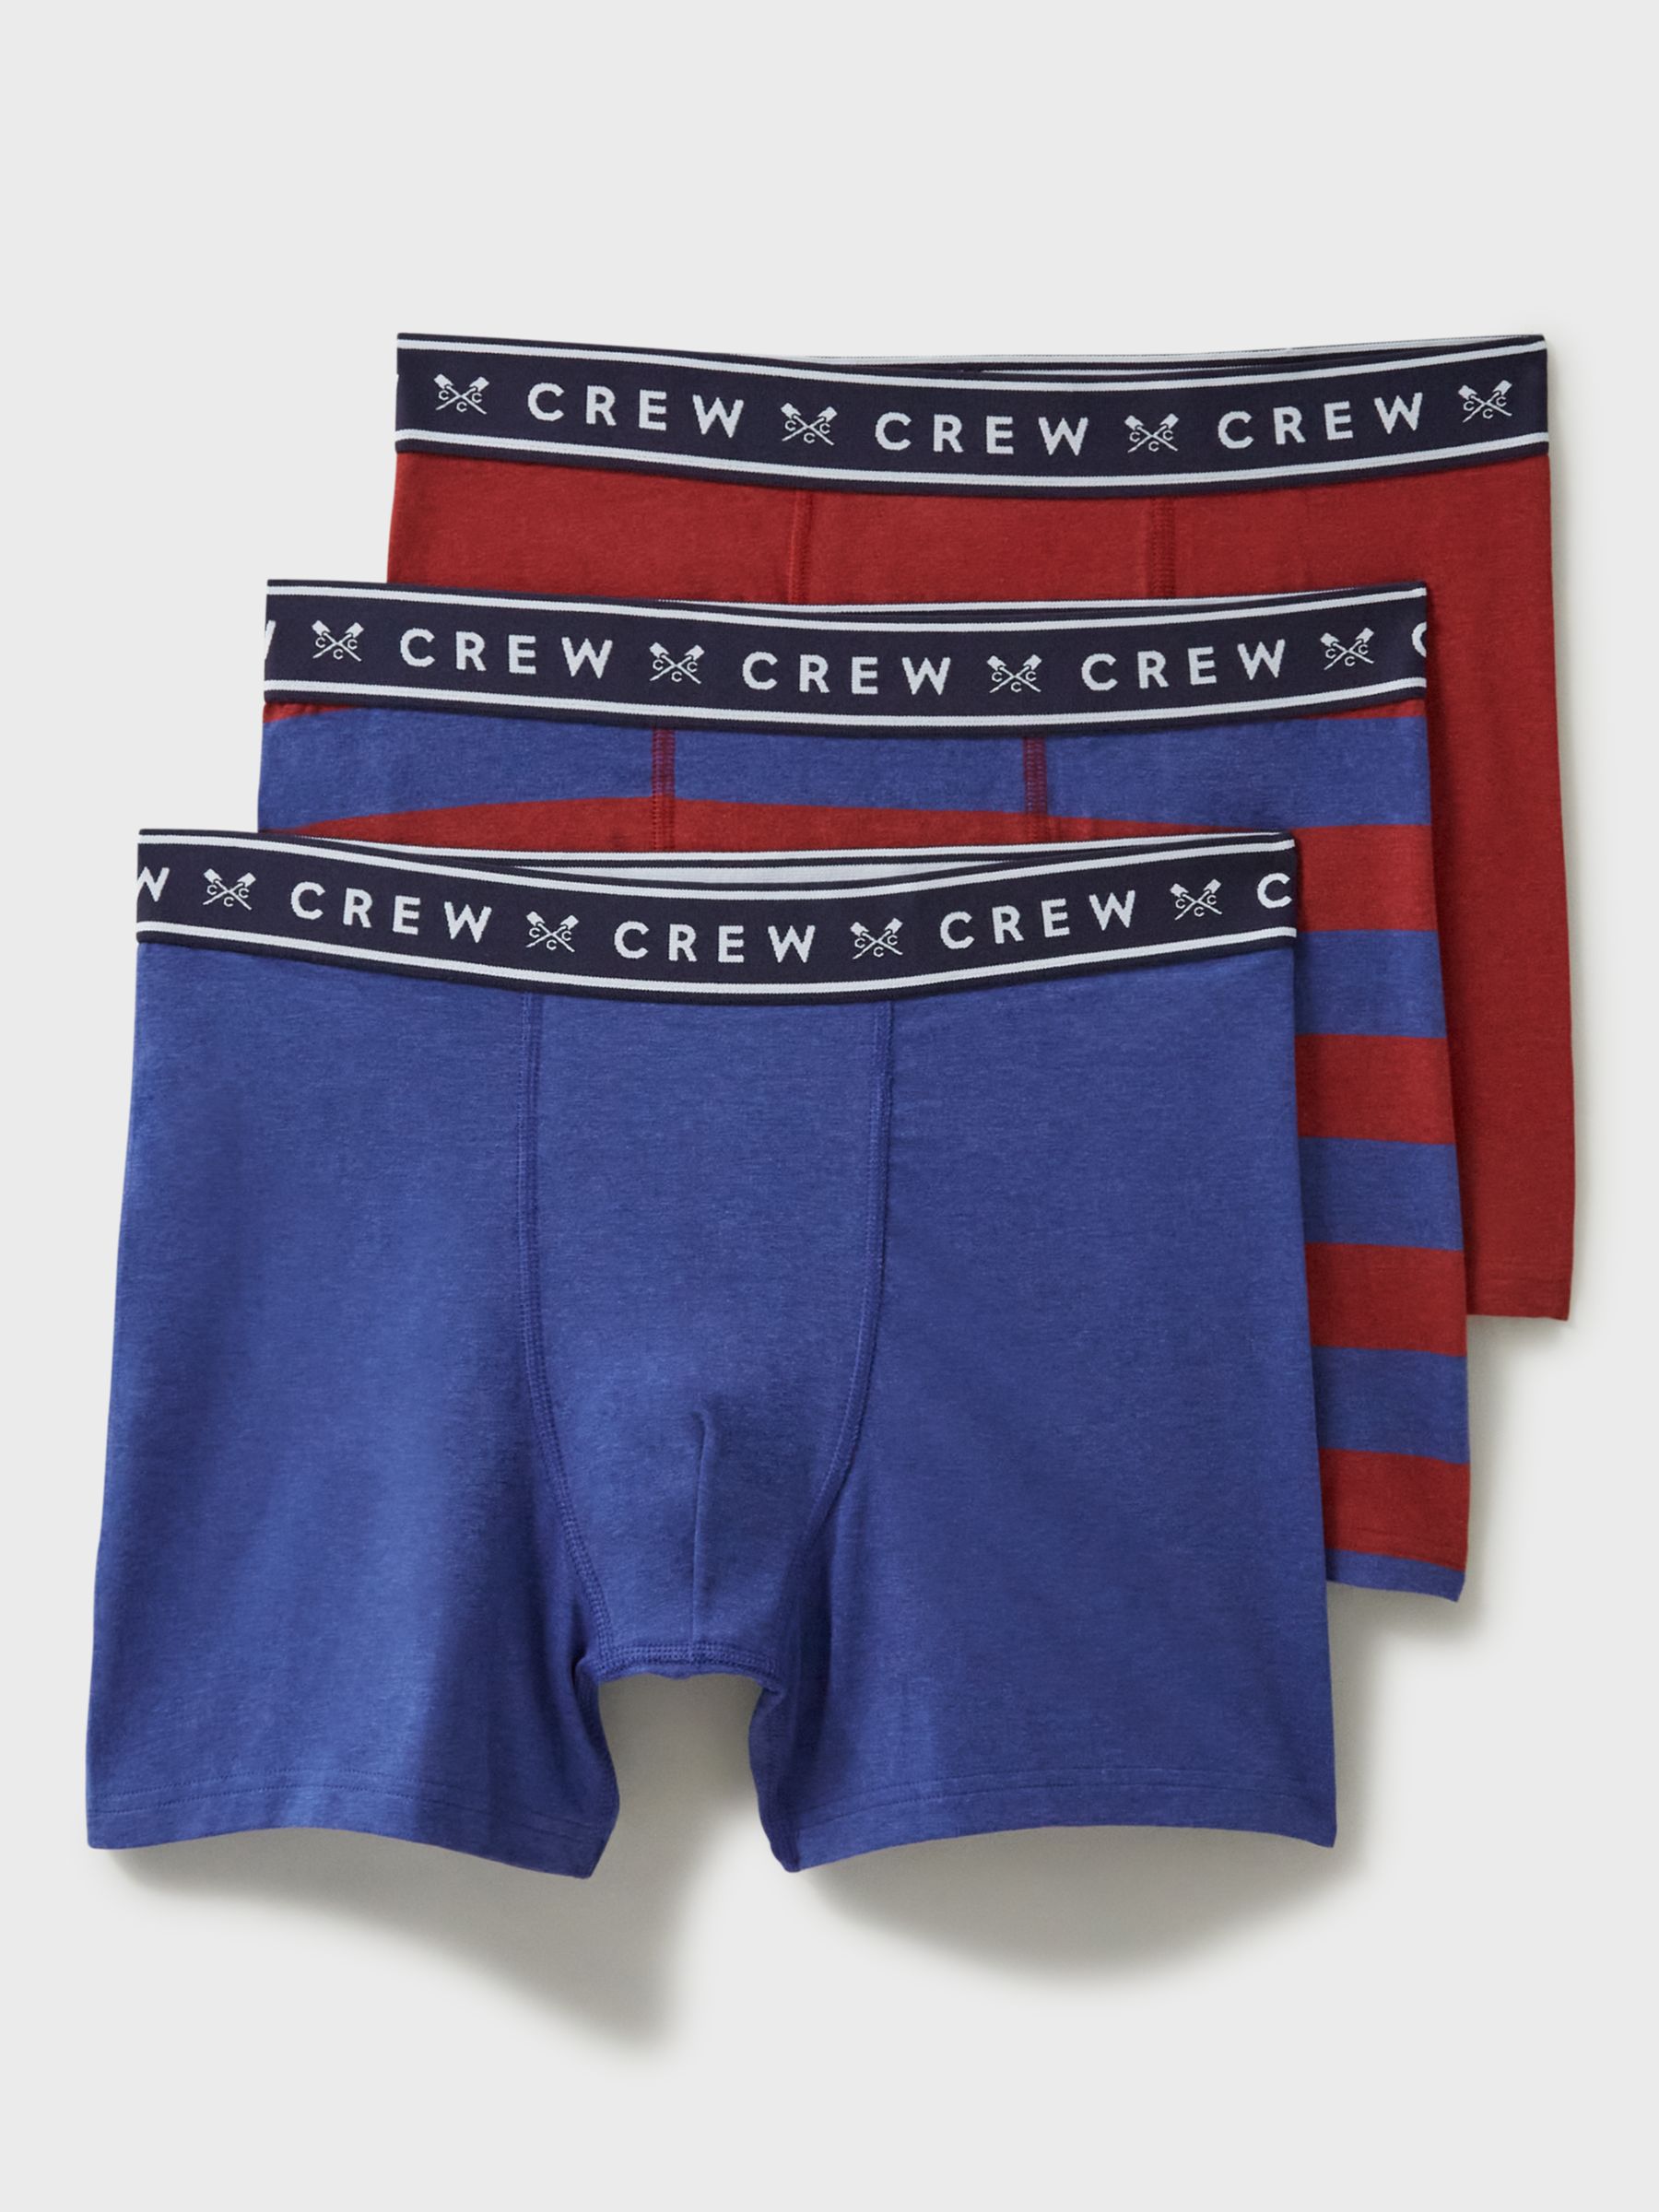 Crew Clothing Jersey Boxers, Pack of 3, Red/Navy, S